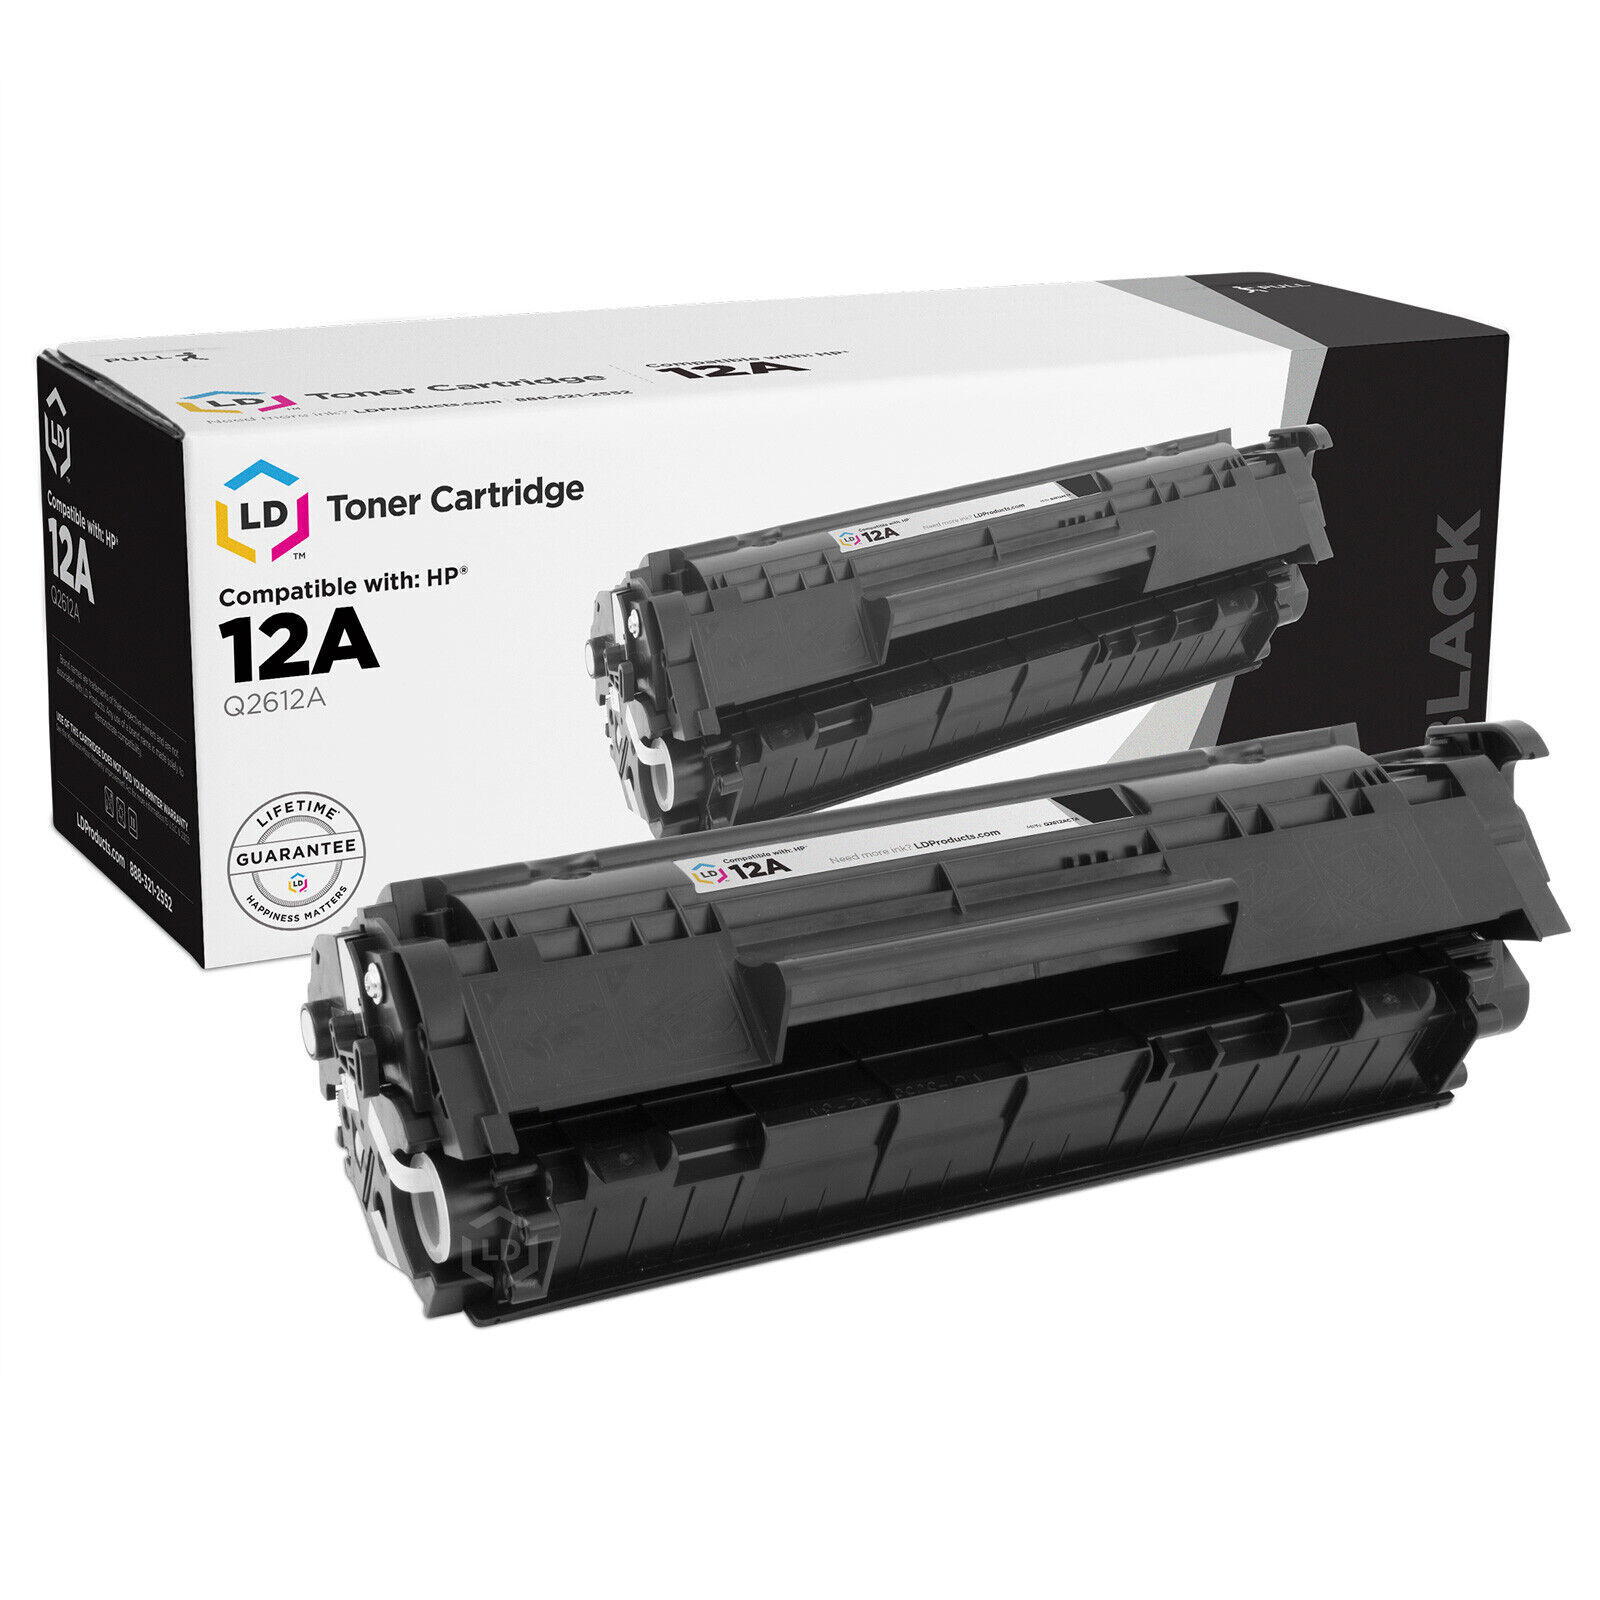 LD Products Compatible Replacement for HP Q2612A 12A Black Toner Cartridge